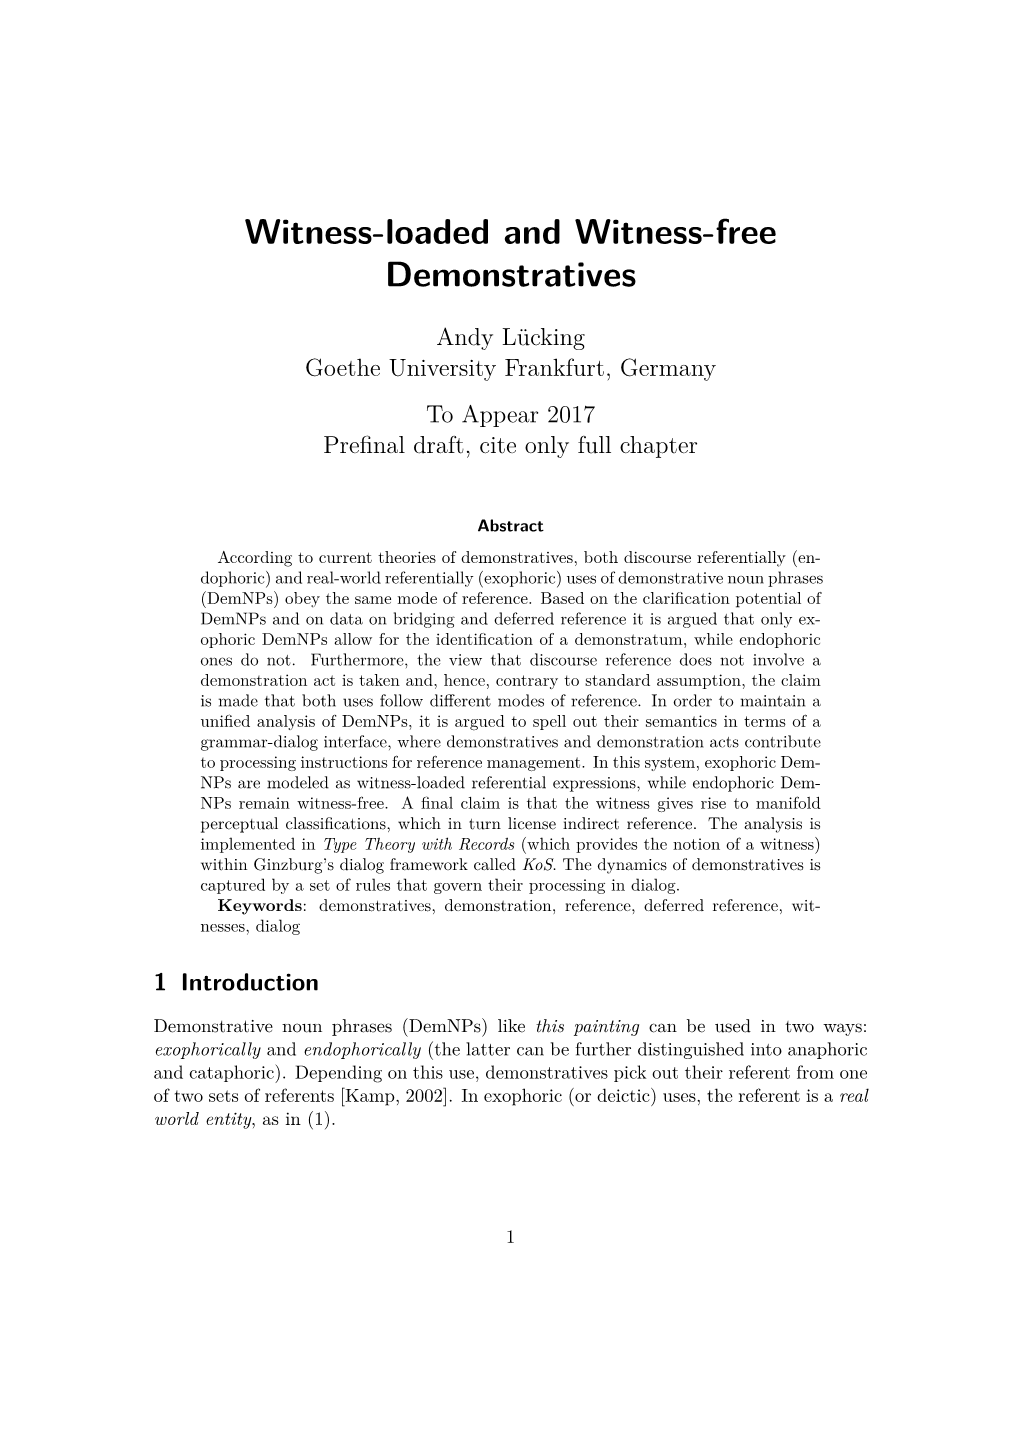 Witness-Loaded and Witness-Free Demonstratives